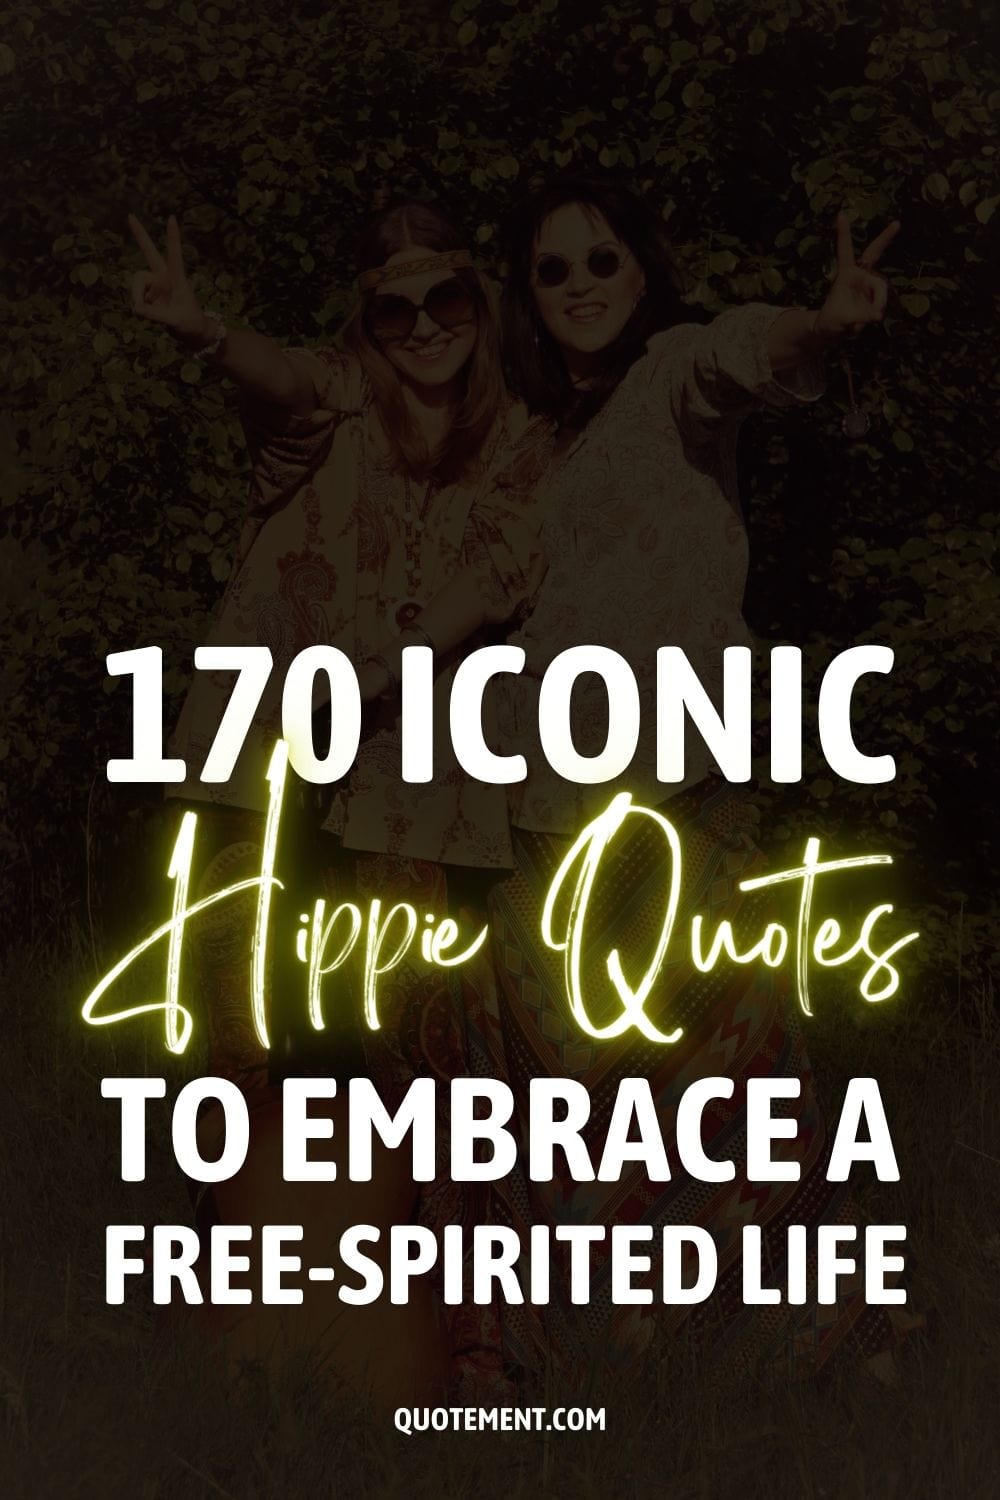 170 Iconic Hippie Quotes To Embrace A Free-Spirited Life